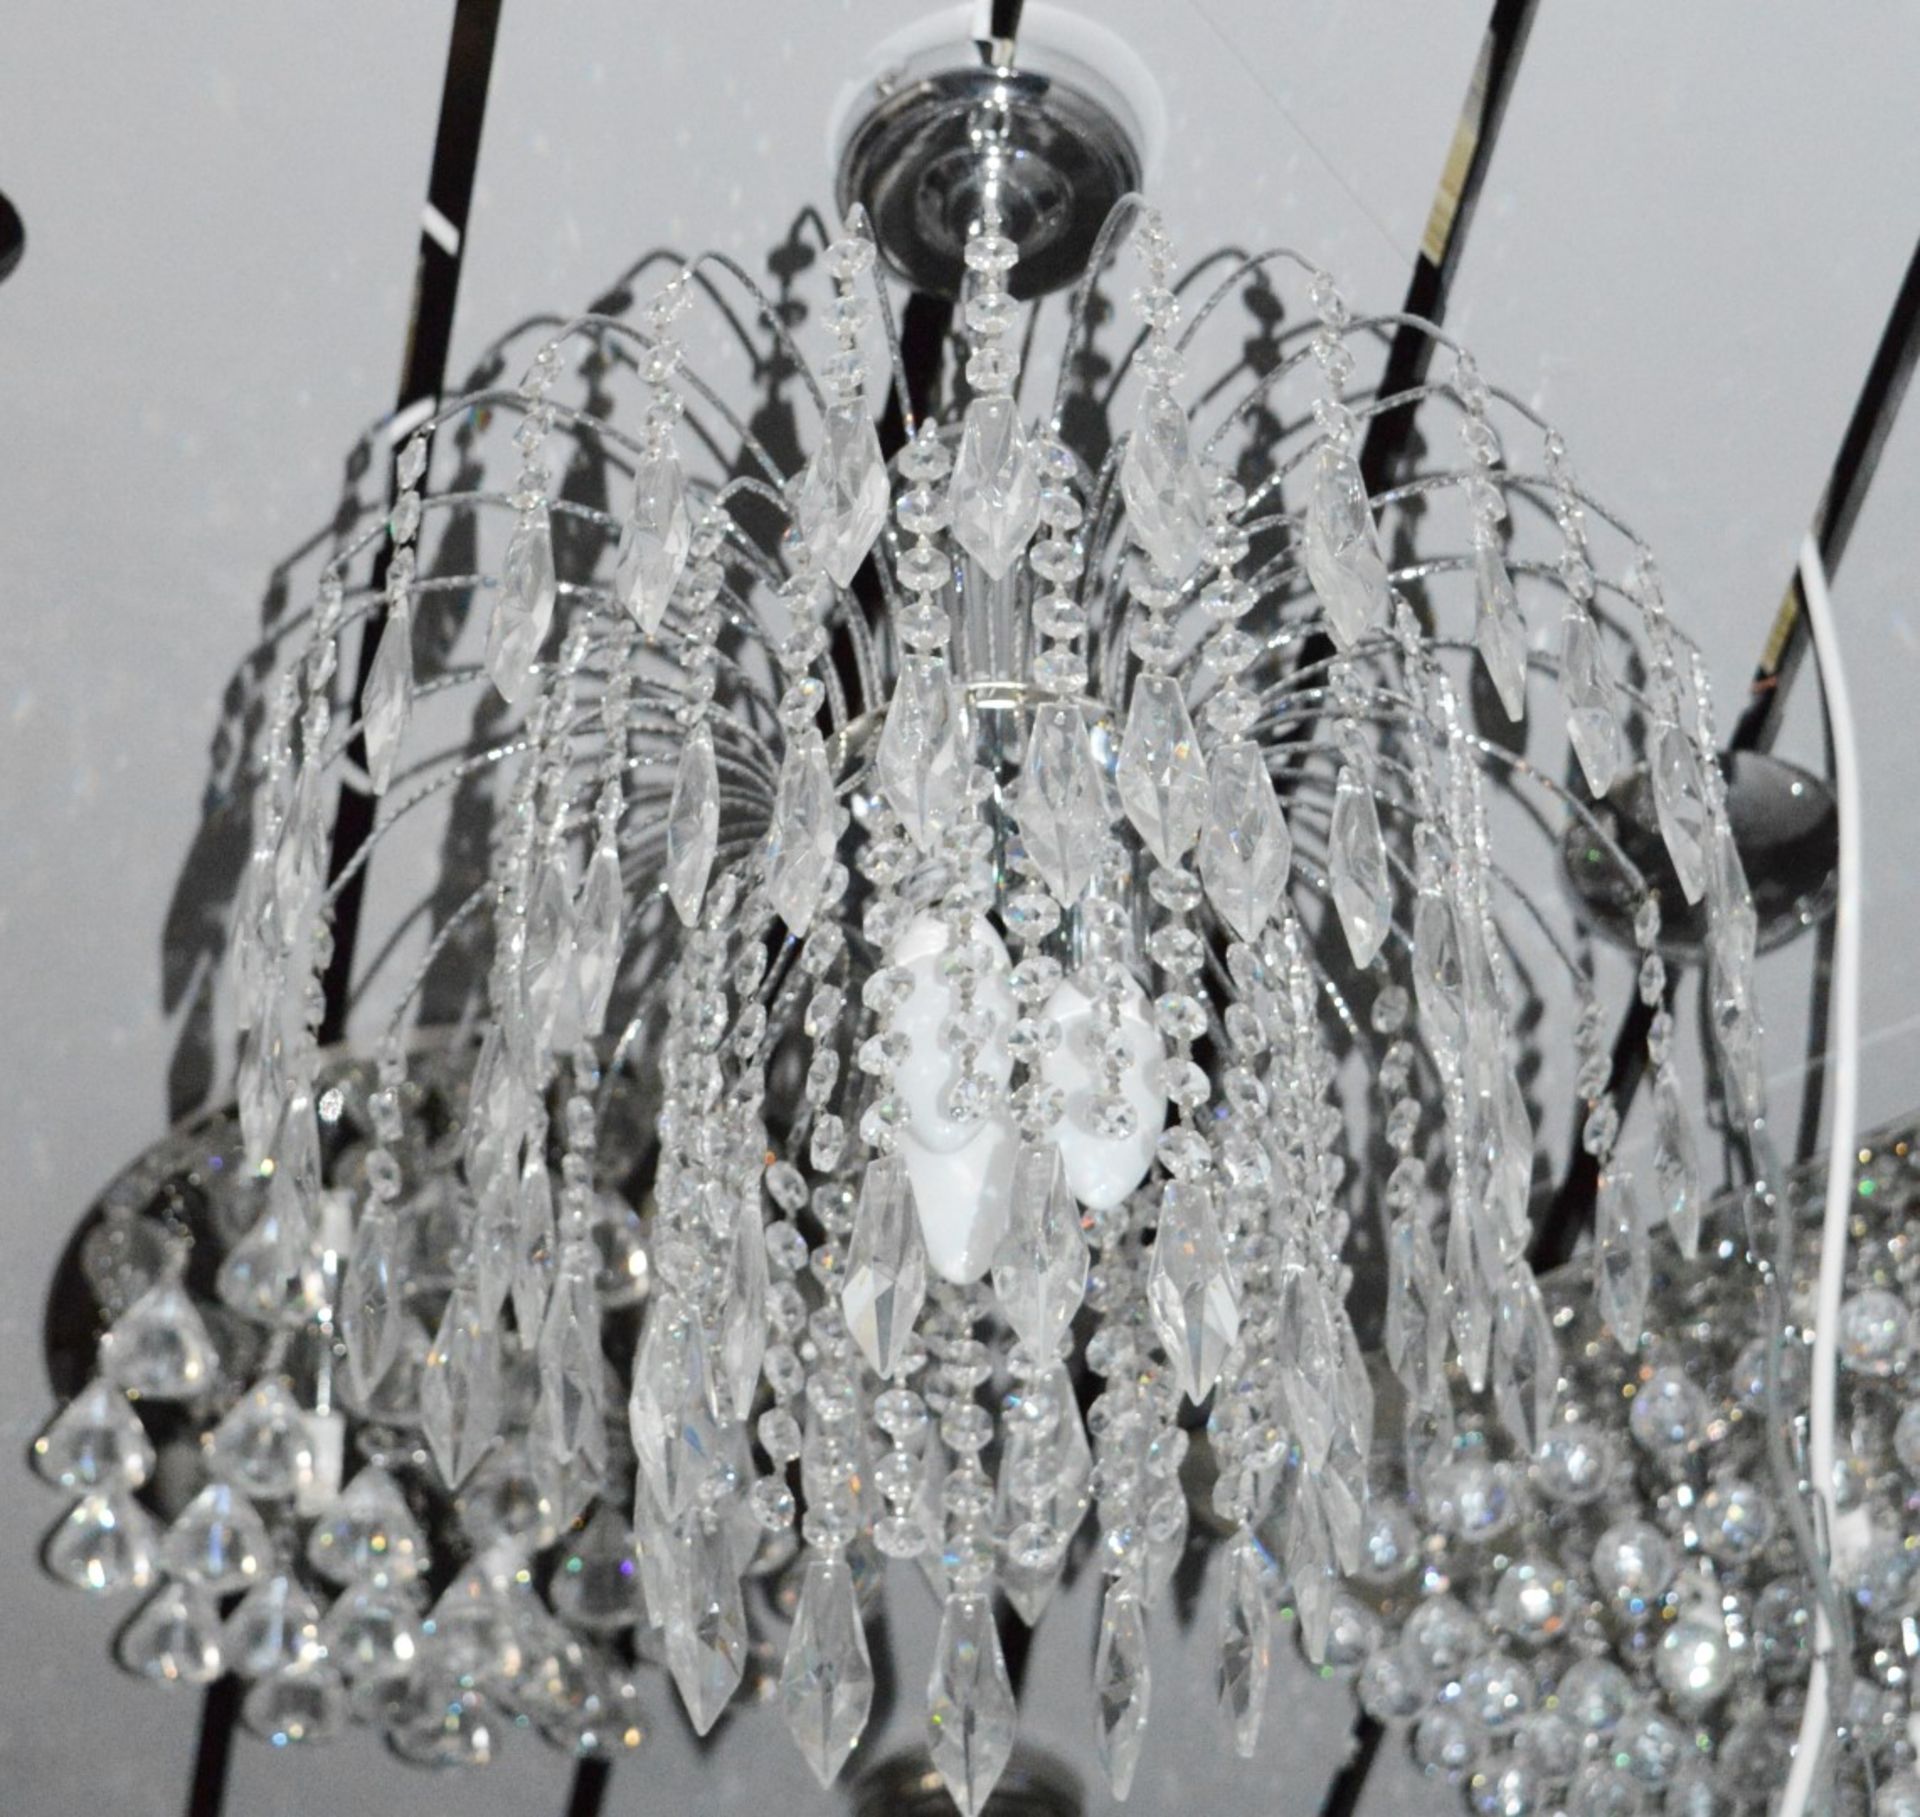 1 x WATERFALL Chrome 3-Light Ceiling Fitting With Crystal Button & Drops Decoration - RRP £256.80 - Image 4 of 4